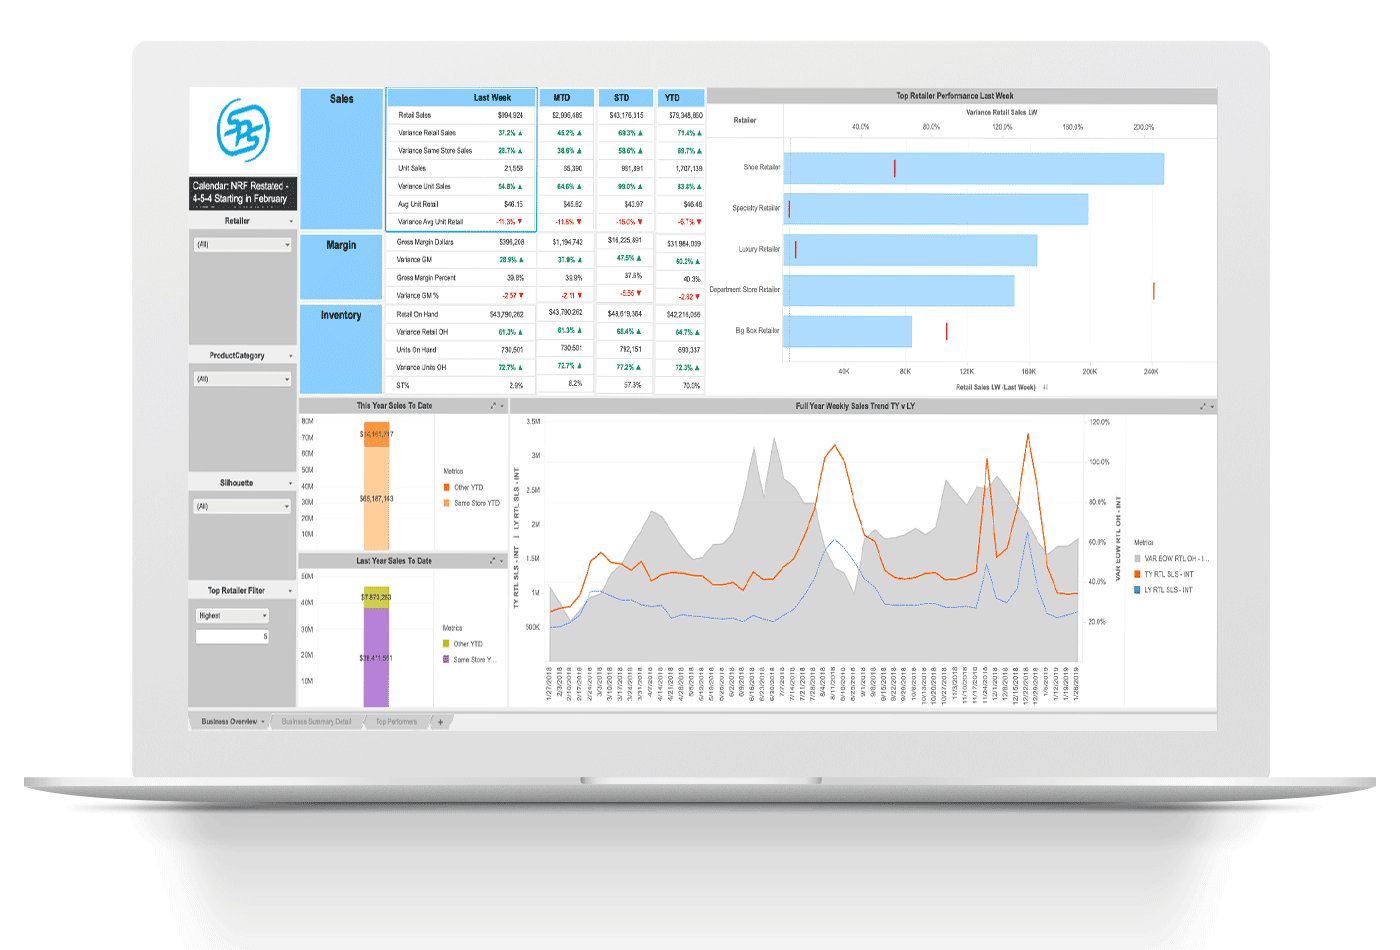 SPS Analytics has helpful dashboards that allow you to dive deep into your retail data.